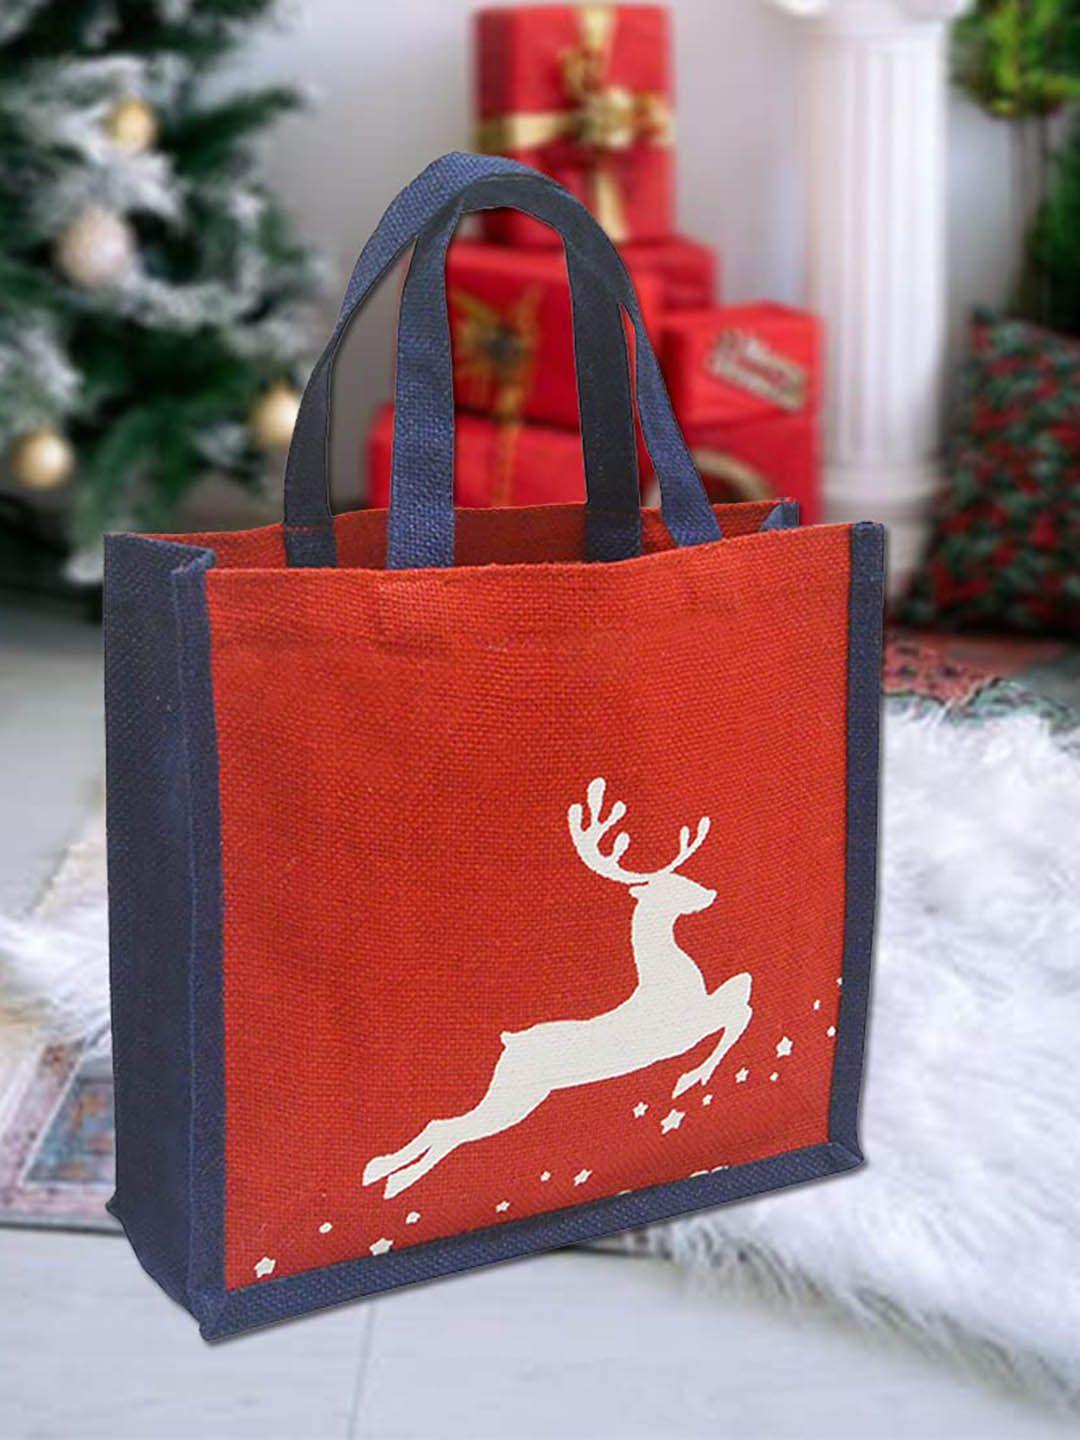 earthbags red structured tote bag